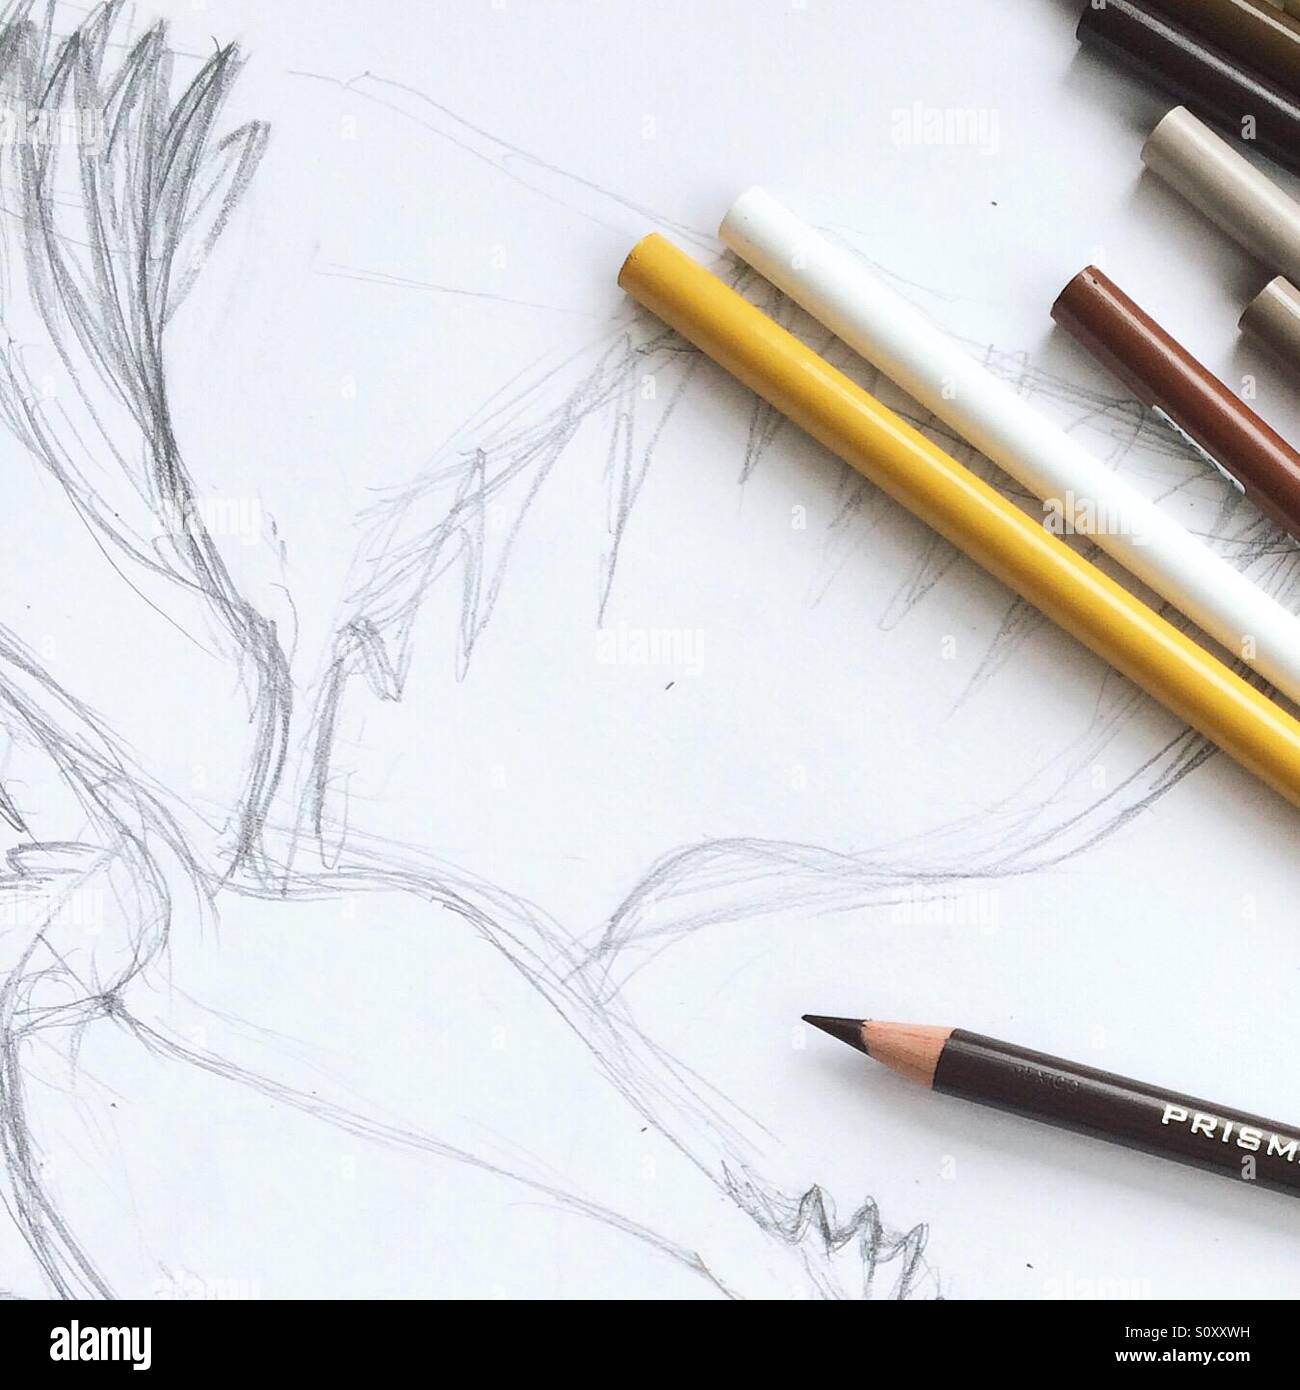 XユーザーのPaintilleryさん: 「The normal pencil drawing and a pink one aaand a  close up! :D #art #cuteart #anime #manga #drawing #ocs #kawaii #oc #draw  #kunst #zeichnung #artist #drawingart #ArtistOnTwitter #mangastyle  https://t.co/quK3yUTkbV」 / X